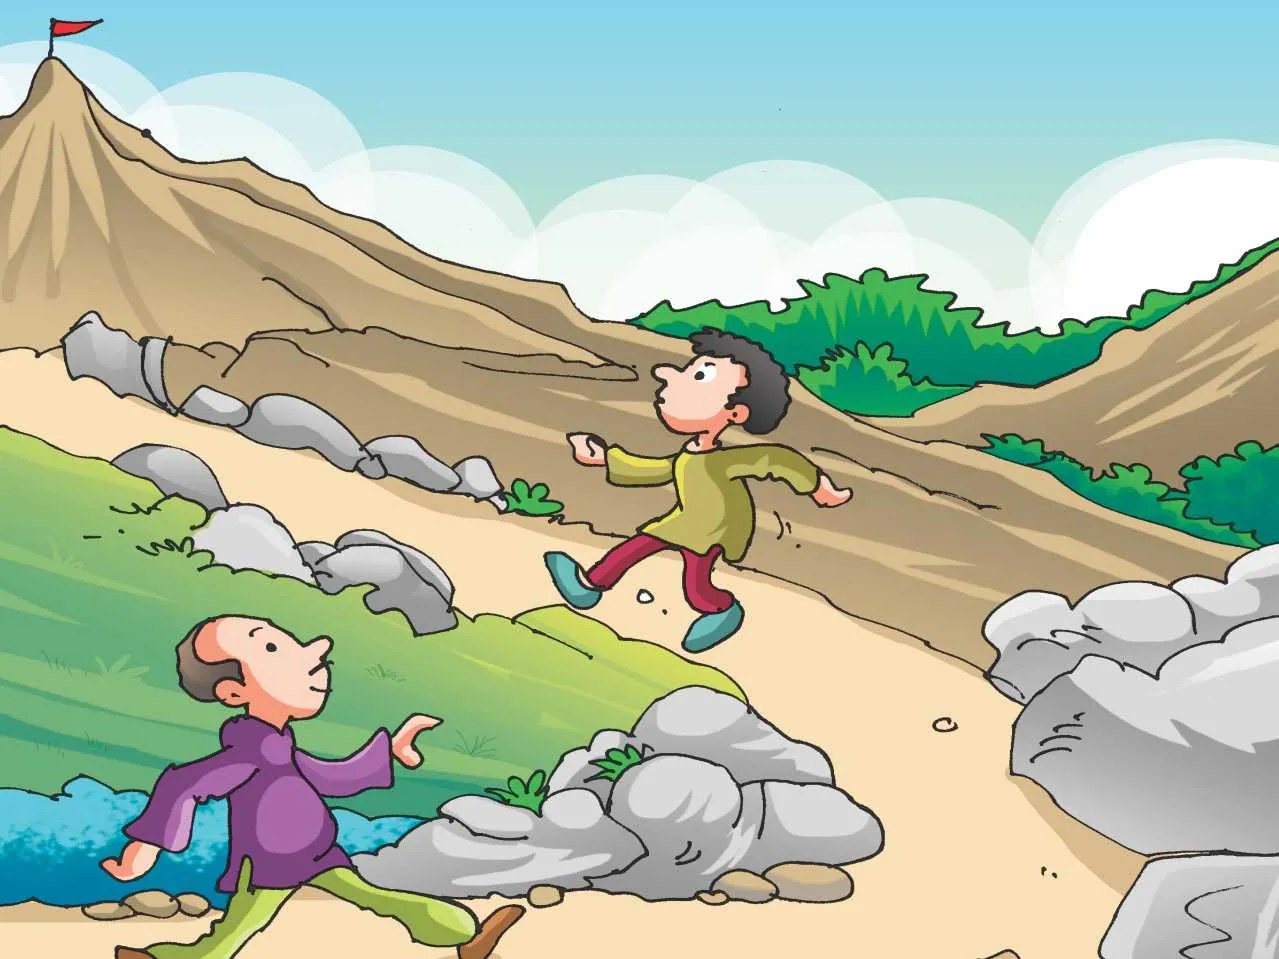 Man with his son on mountain cartoon image